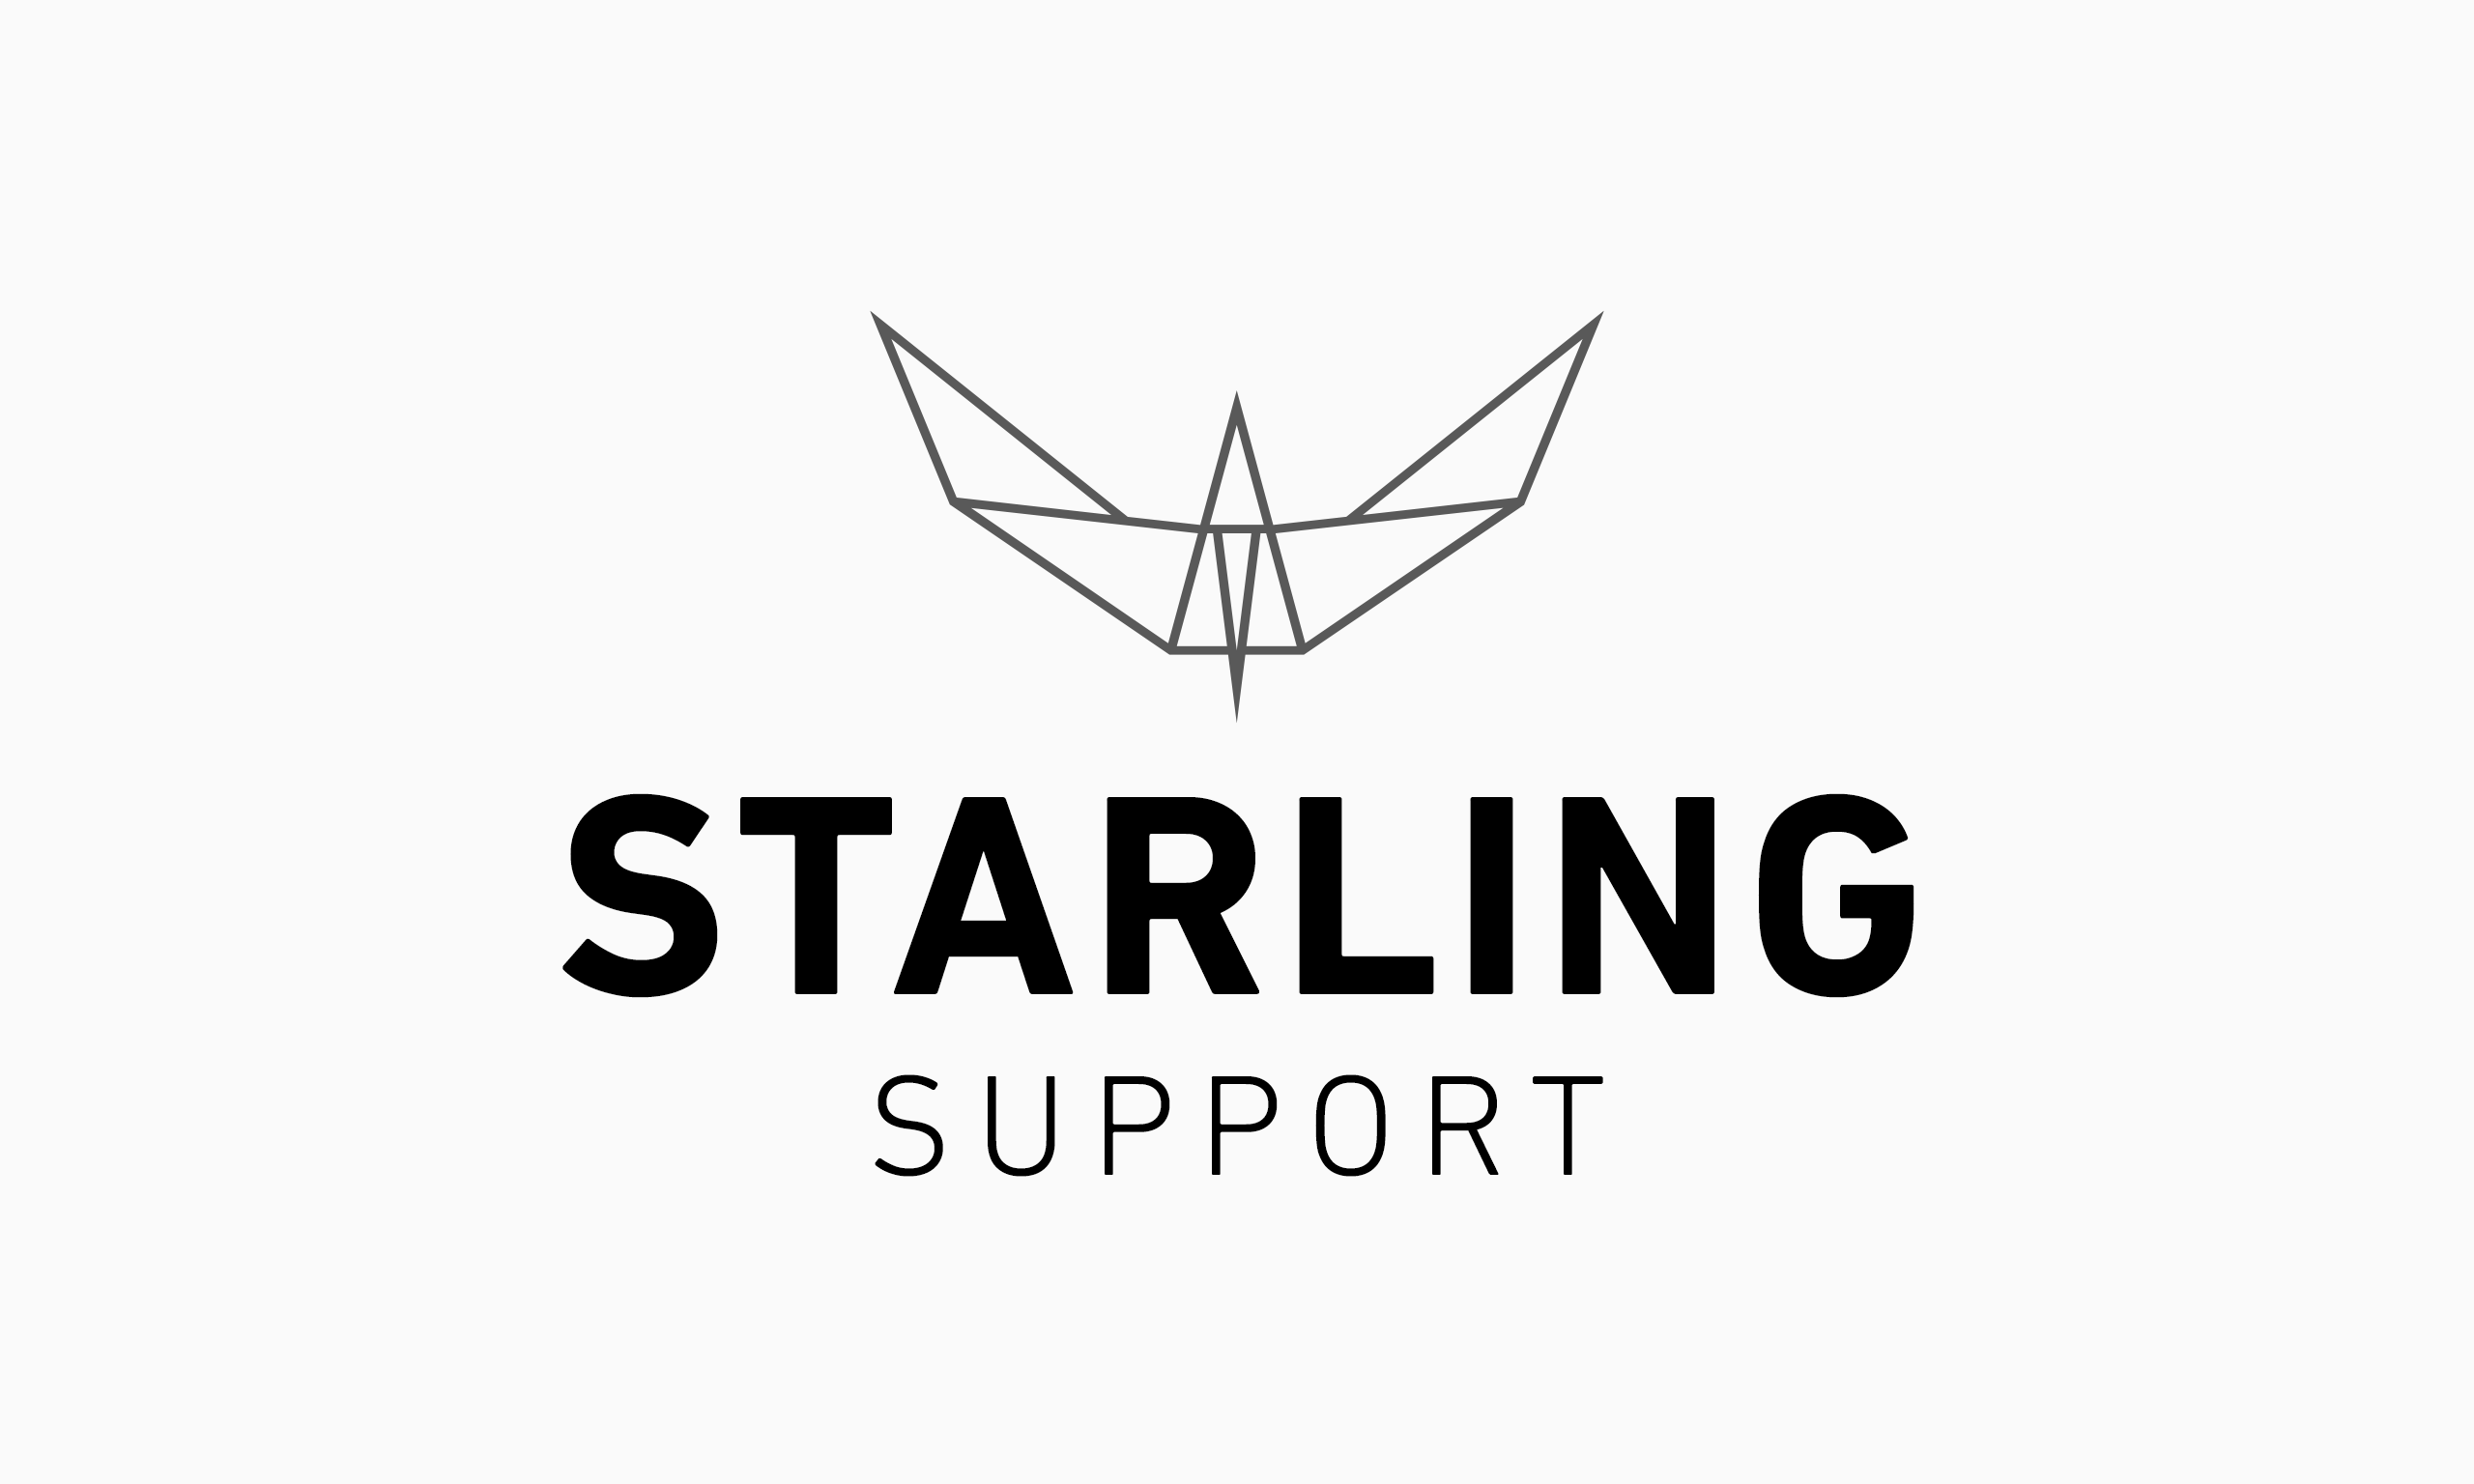 Starling Consulting